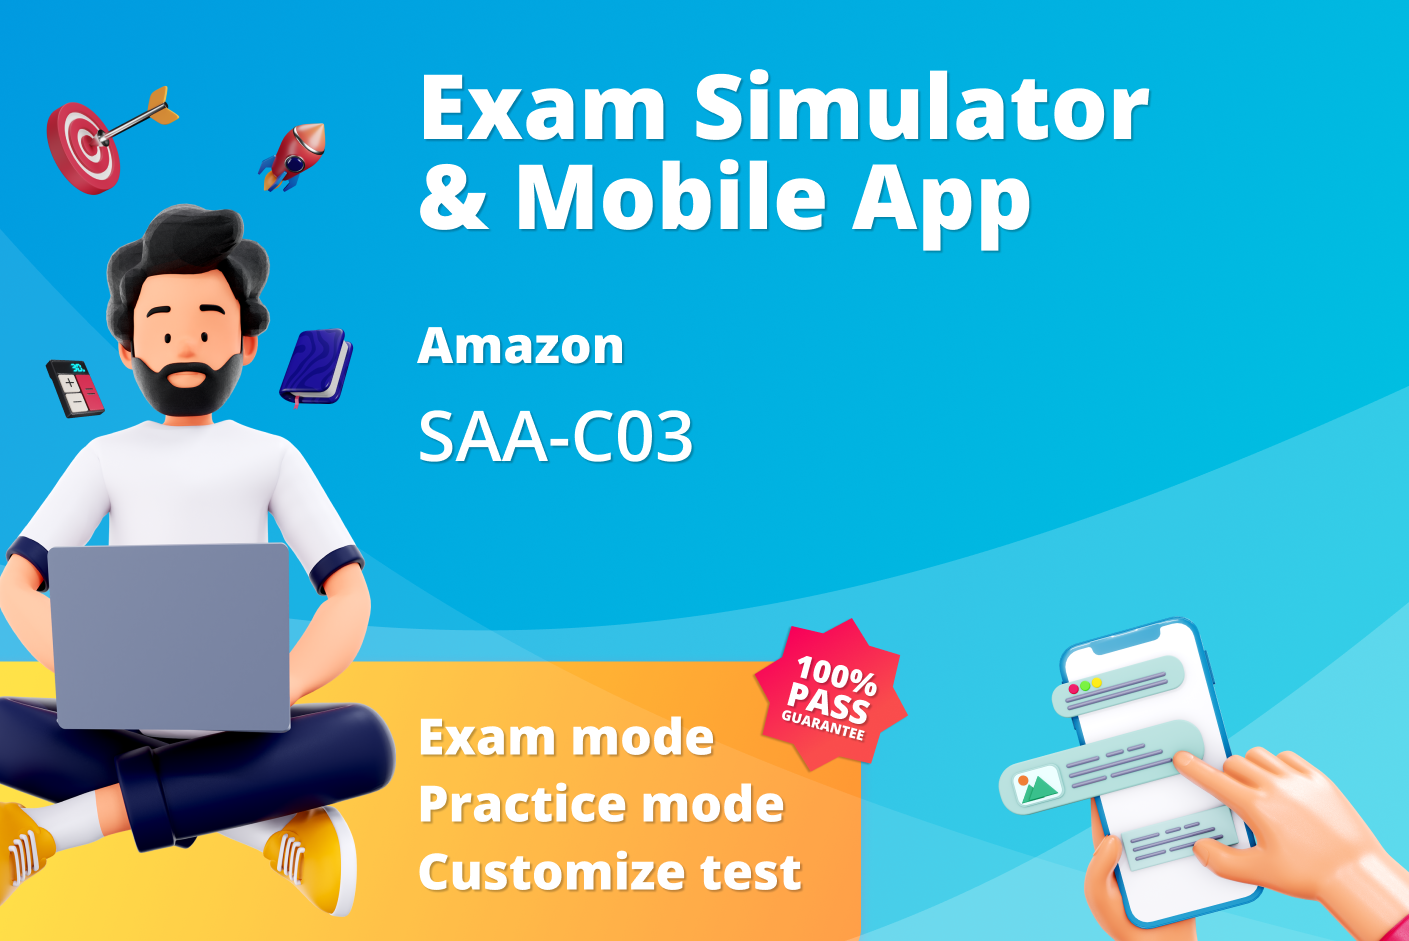 SAA-C03 mock exam: Get fully prepared for the AWS Certified Solutions Architect - Associate certification